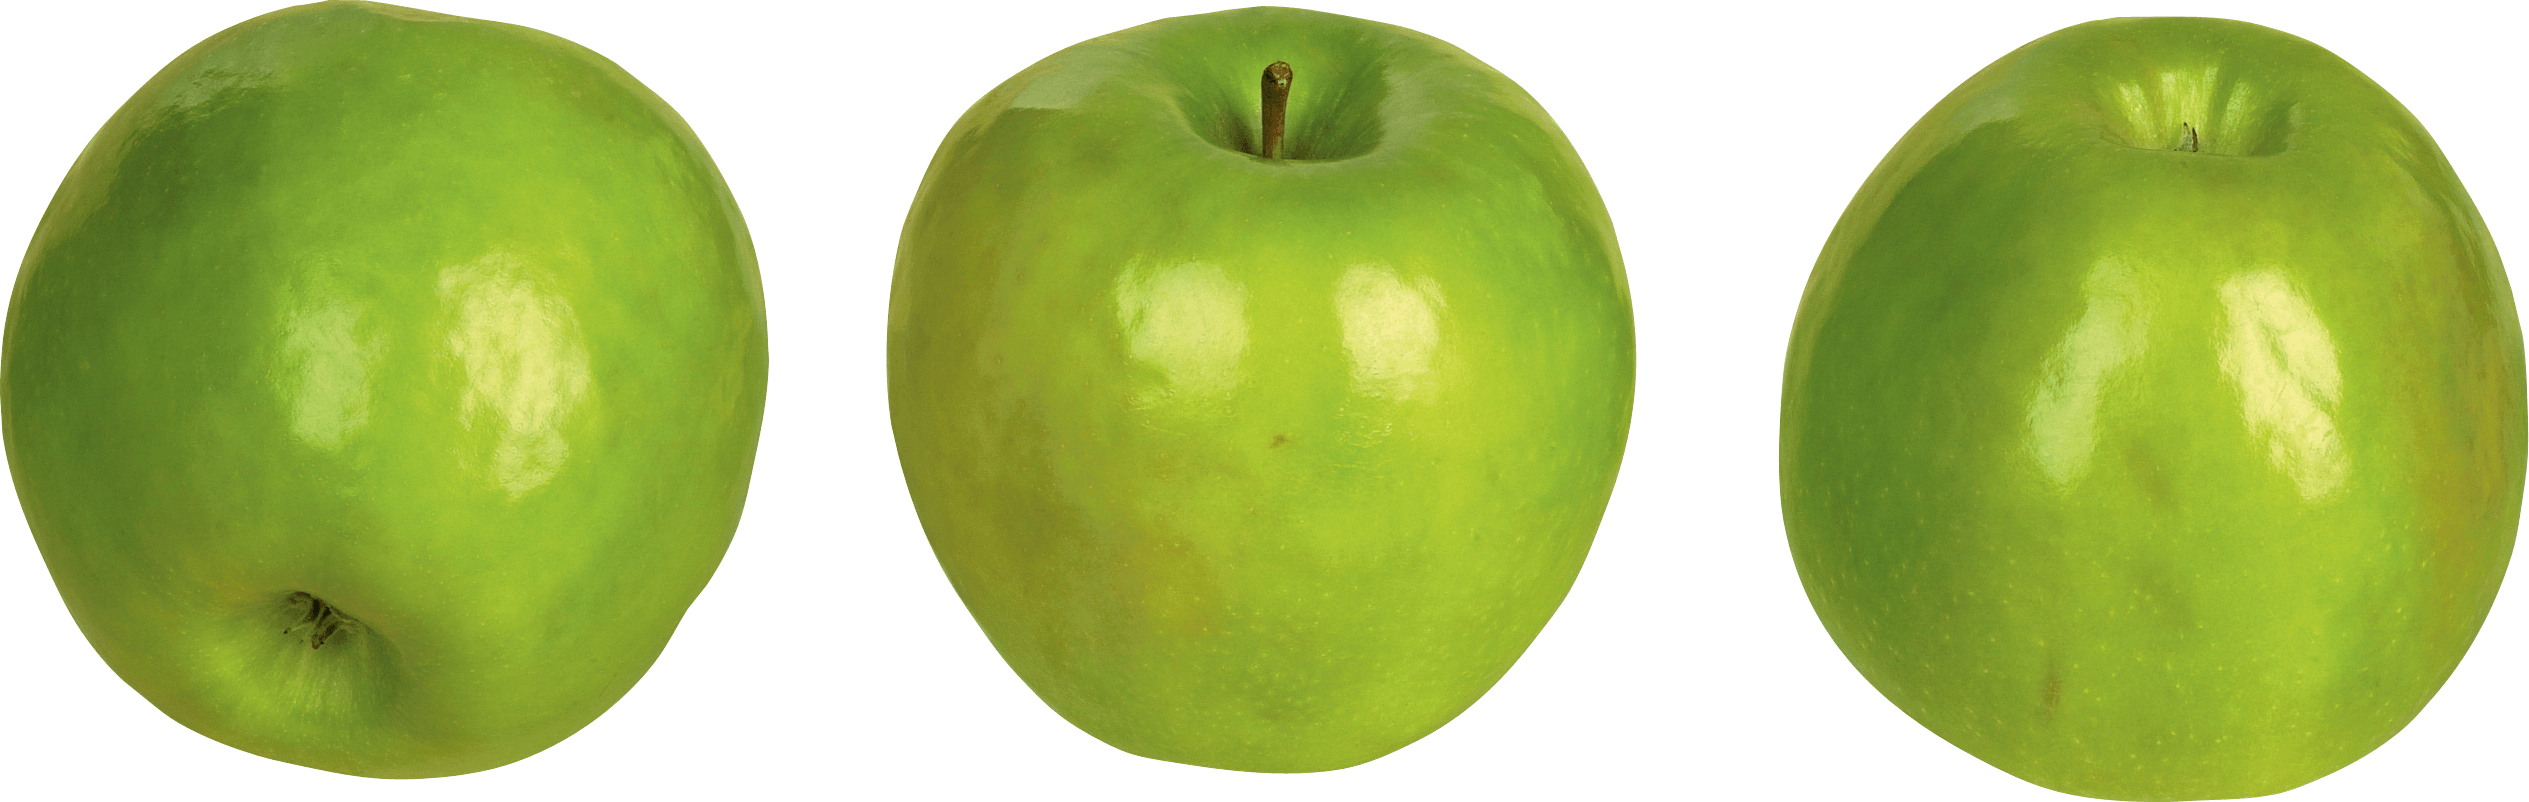 93 green apples png image